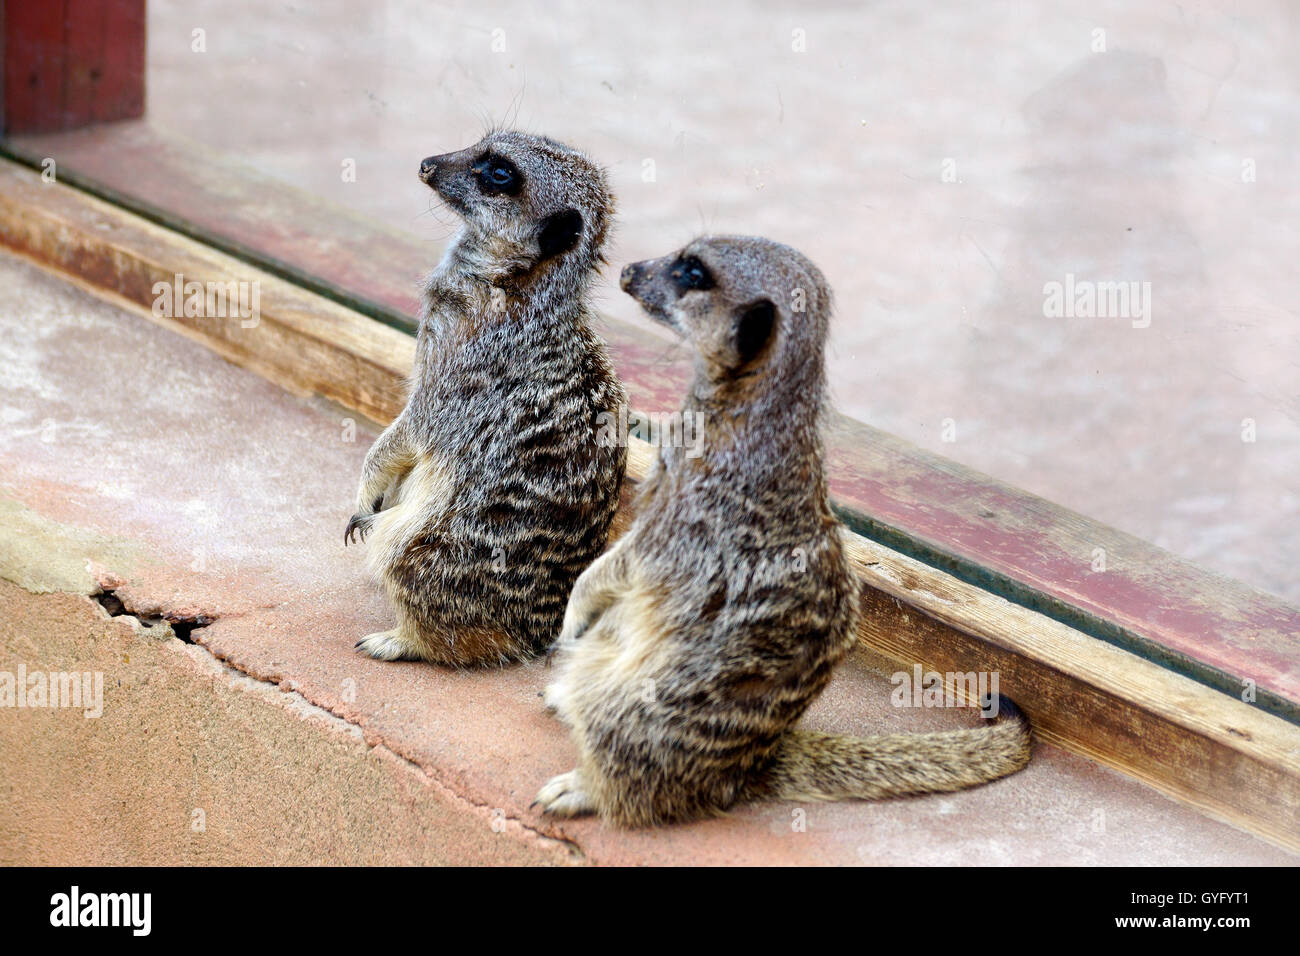 TWO MEERKAT'S ON THE LOOKOUT Stock Photo